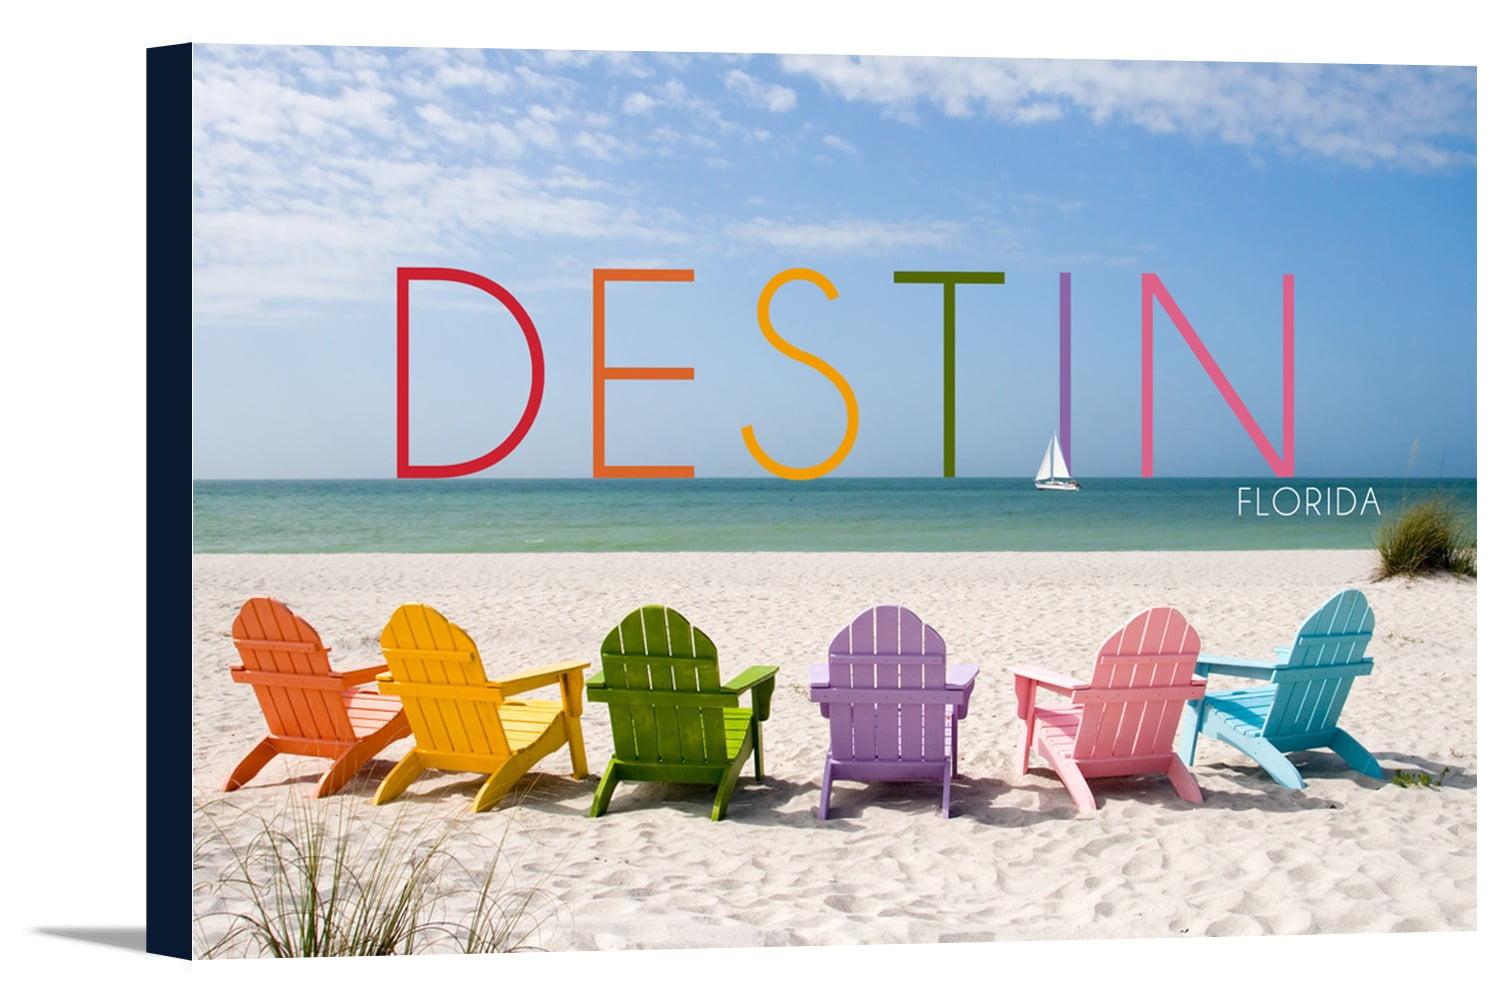 Destin, Florida - Colorful Beach Chairs - Lantern Press Photography (18x12 Gallery Wrapped ...